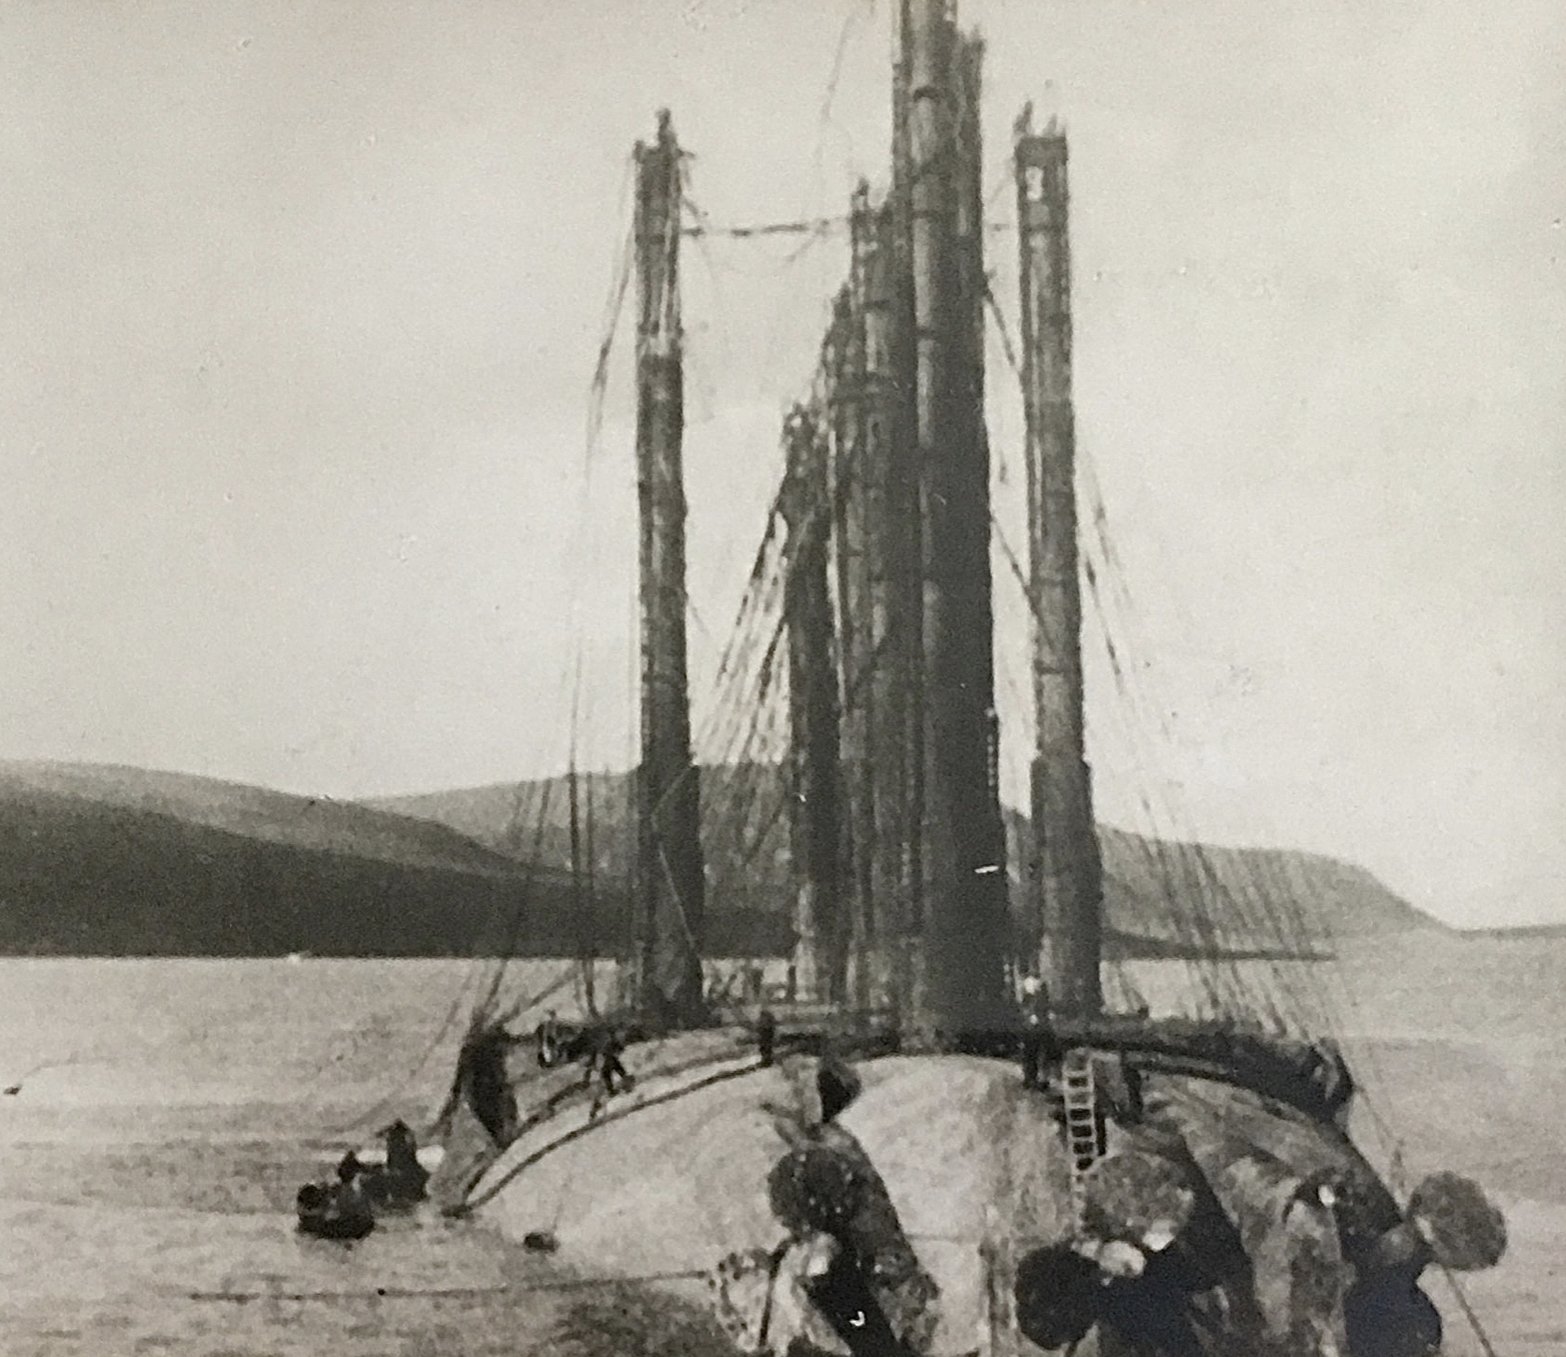 The Salvage in Scapa Flow